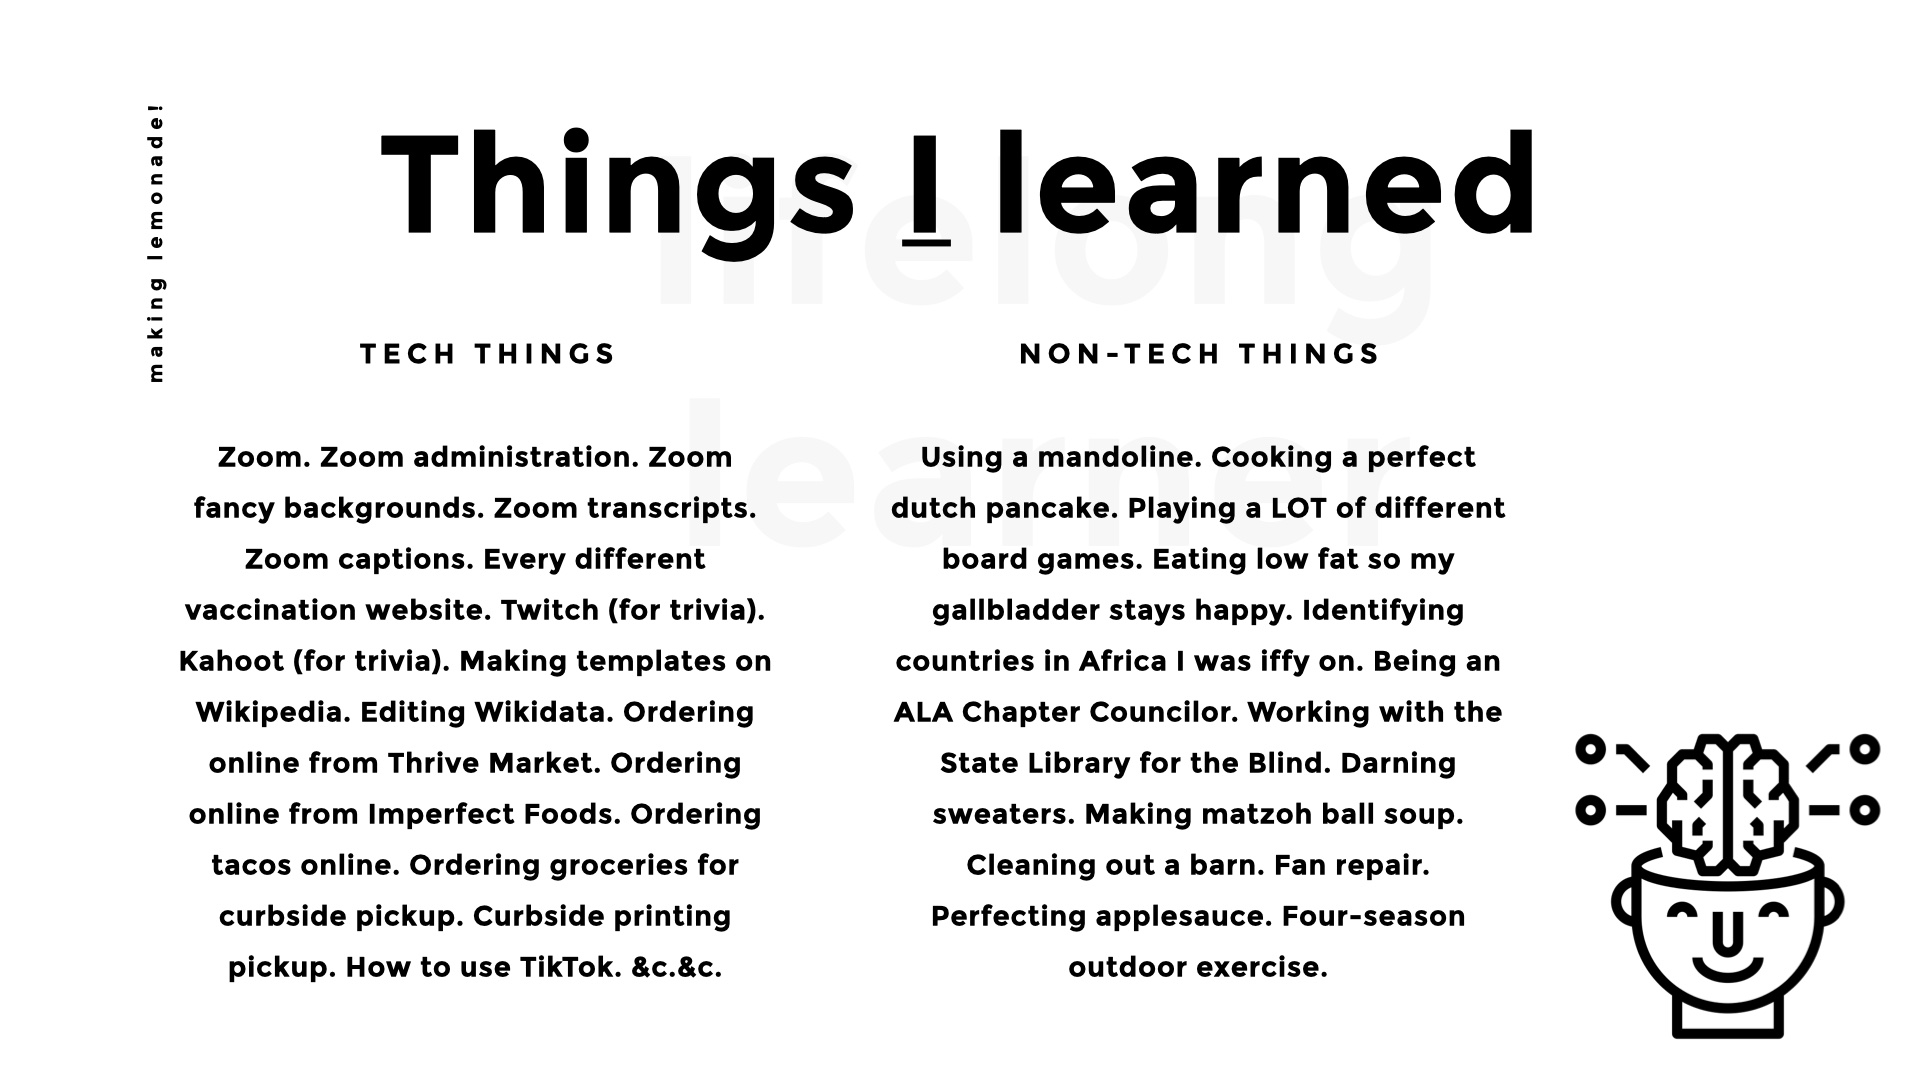 Things I learned. Tech things: Zoom. Zoom administration. Zoom fancy backgrounds. Zoom transcripts. Zoom captions. Every different vaccination website. Twitch (for trivia). Kahoot (for trivia). Making templates on Wikipedia. Editing Wikidata. Ordering online from Thrive Market. Ordering online from Imperfect Foods. Ordering tacos online. Ordering groceries for curbside pickup. Curbside printing pickup. How to use TikTok. &c.&c. Non-tech things: How to use a mandoline. How to cook a perfect dutch pancake. How to play a LOT of different board games. How to eat low fat so my gallbladder stays happy. Identifying countries in Africa I was iffy on. Being an ALA Chapter Councilor. Working with the State Library for the Blind. Darning sweaters. Matzoh ball soup. How to clean out a barn.